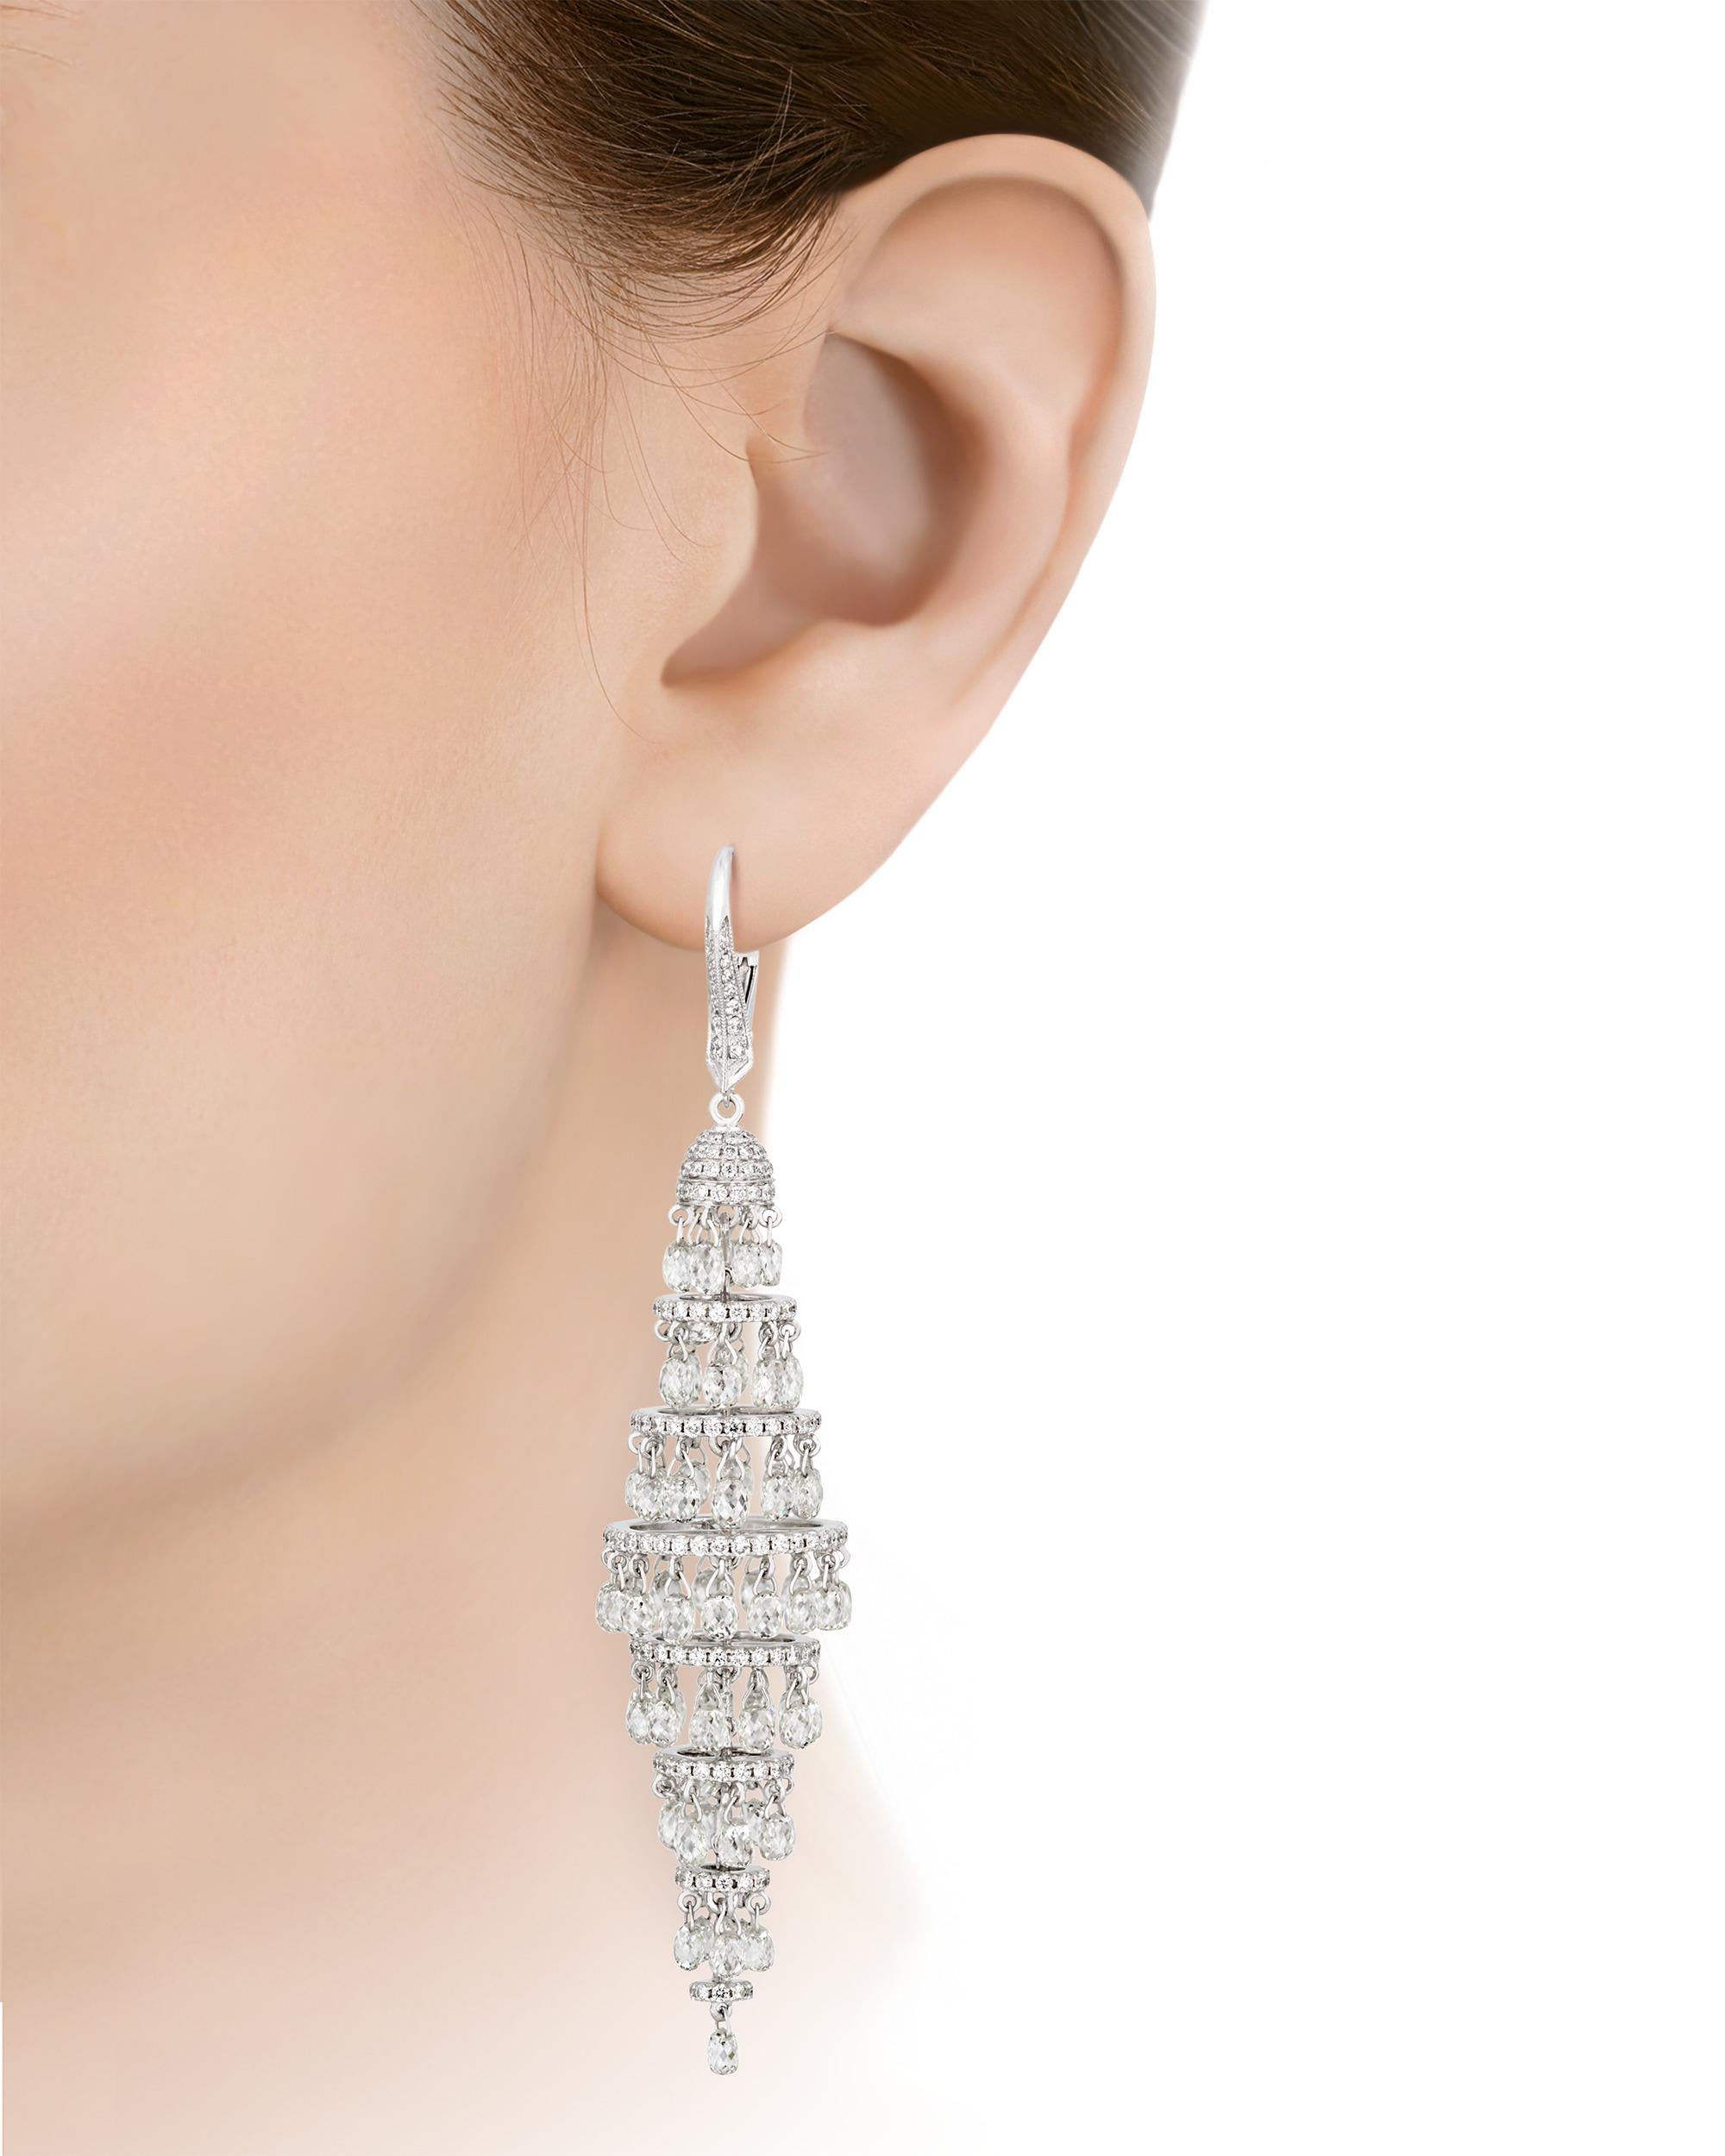 Timelessly elegant with a striking effect when worn, these beautiful chandelier earrings feature an impressive 19.07 carats of sparkling white diamonds faceted into the elegant briolette cut. Briolette is a style of gemstone cut that is